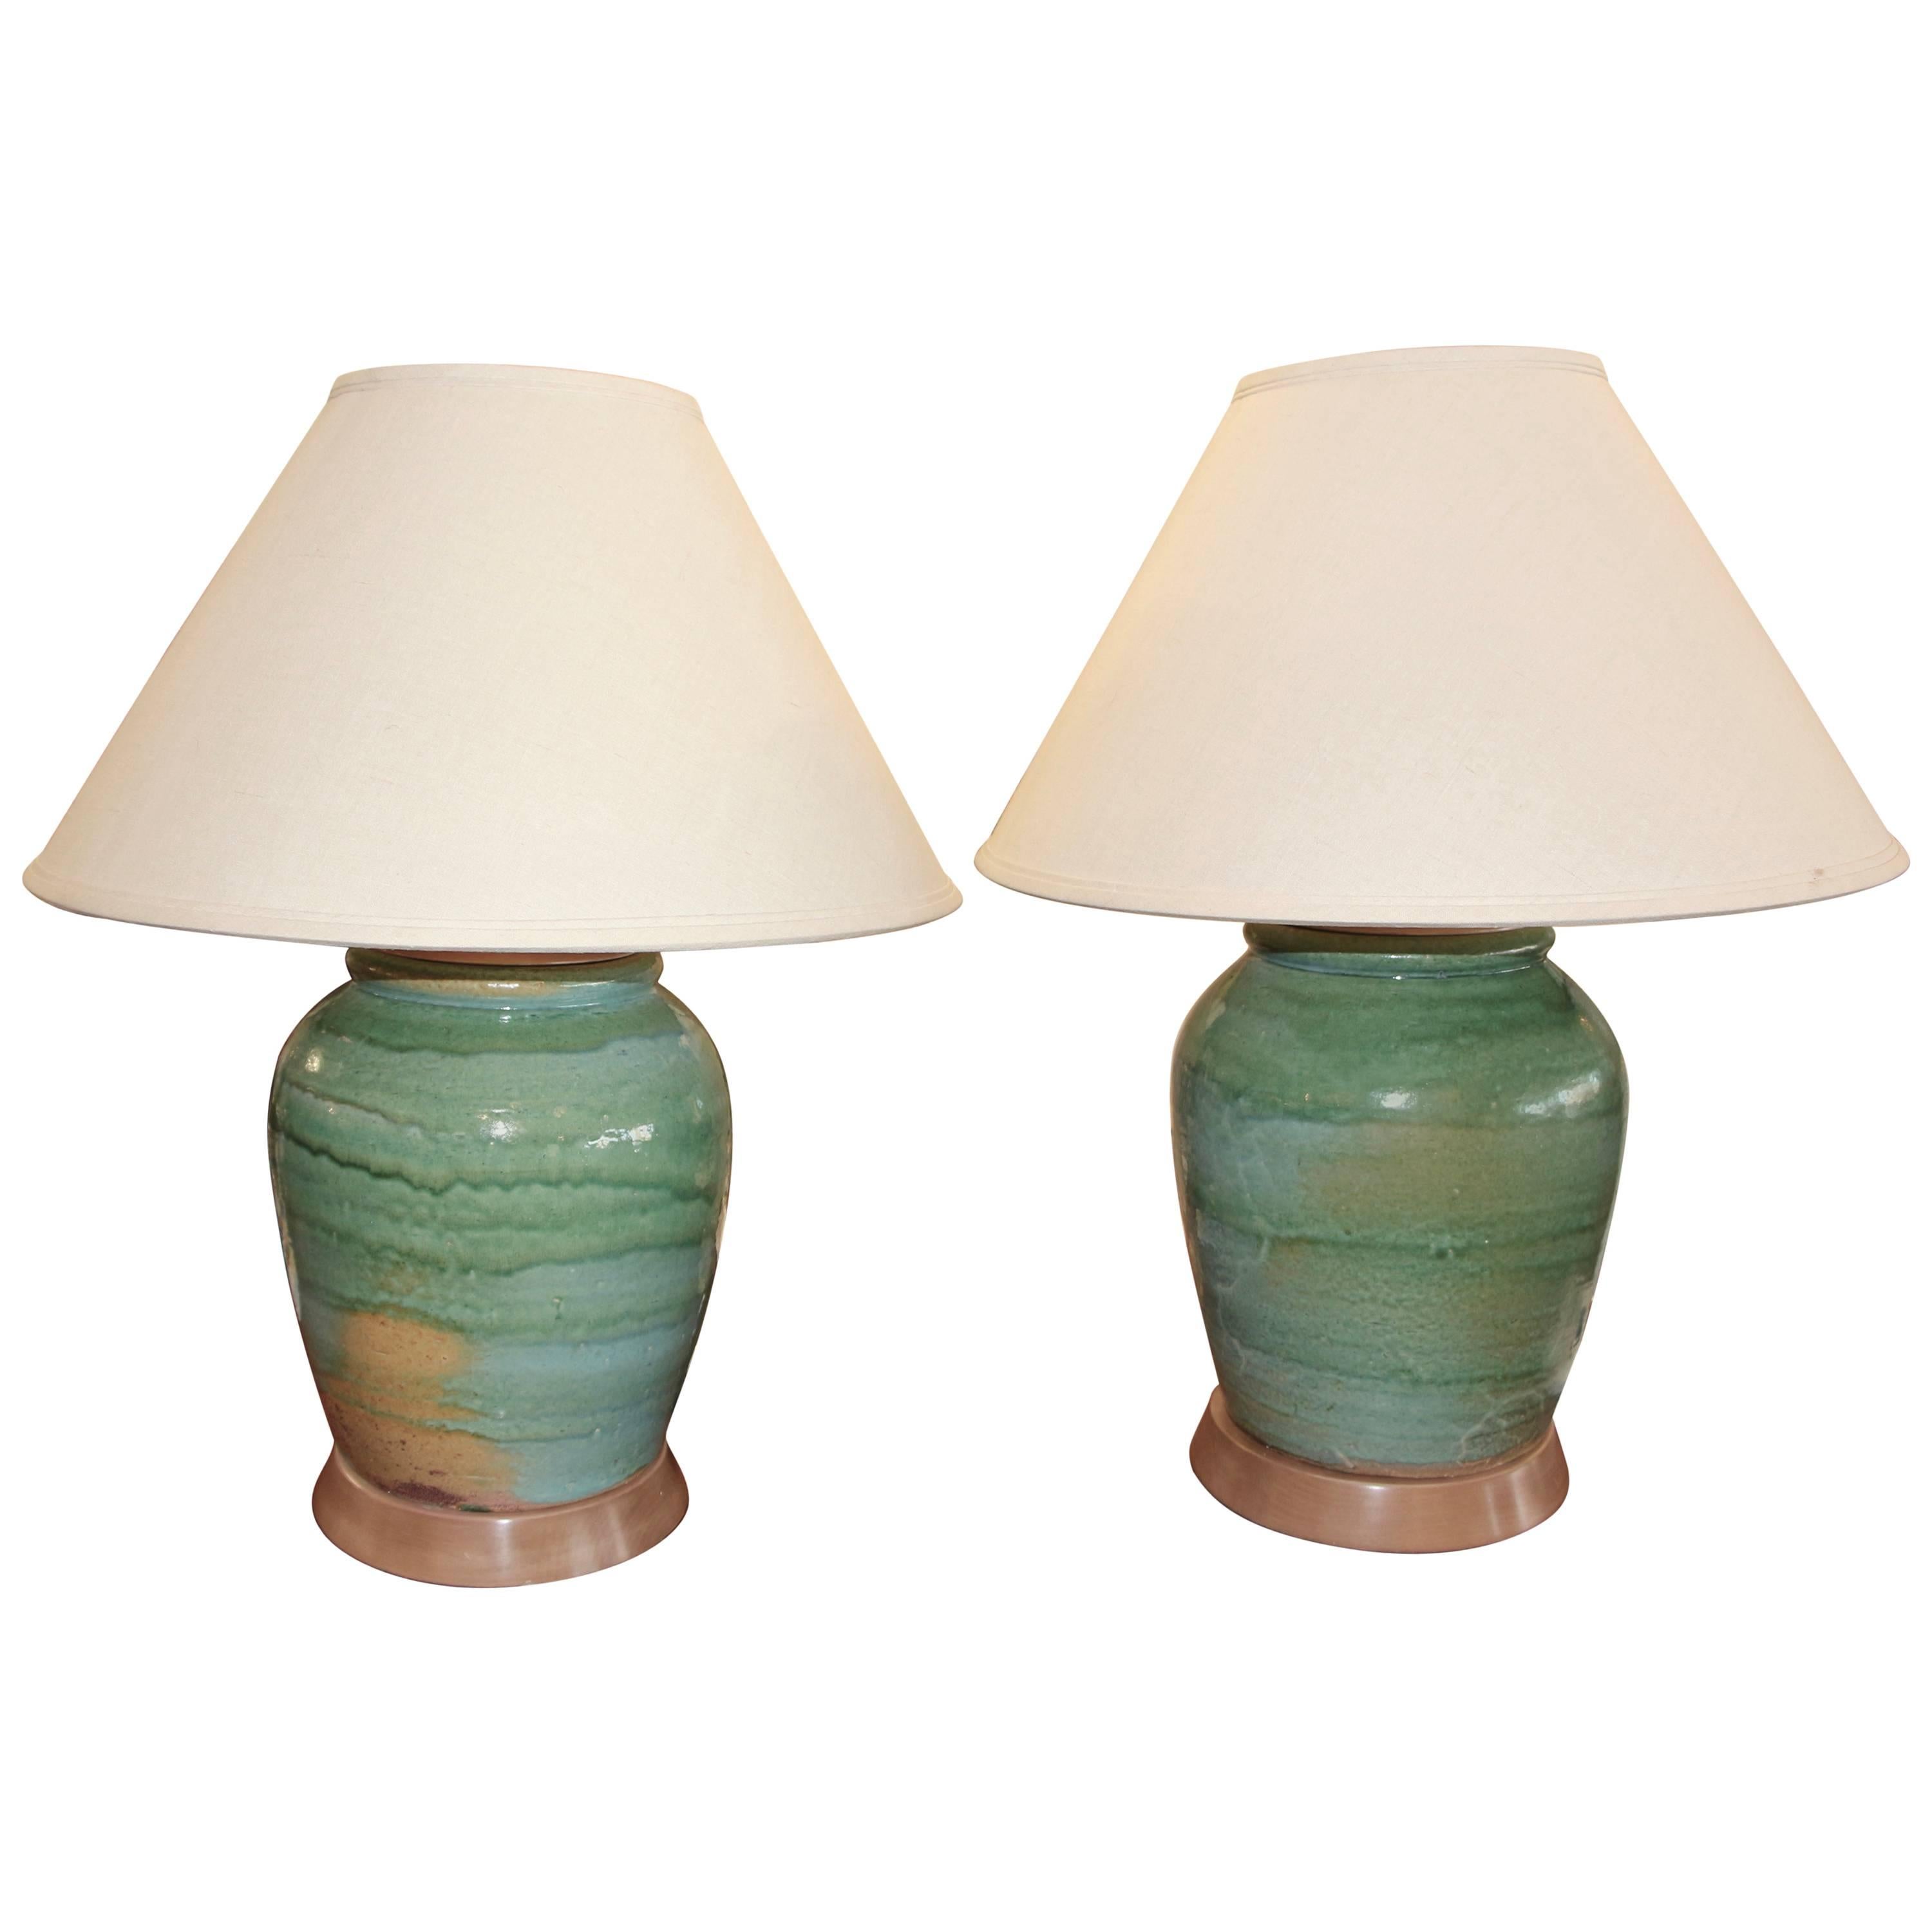 Nice Pair of Steve Chase Lamps Made Out of Old Asian Ceramics